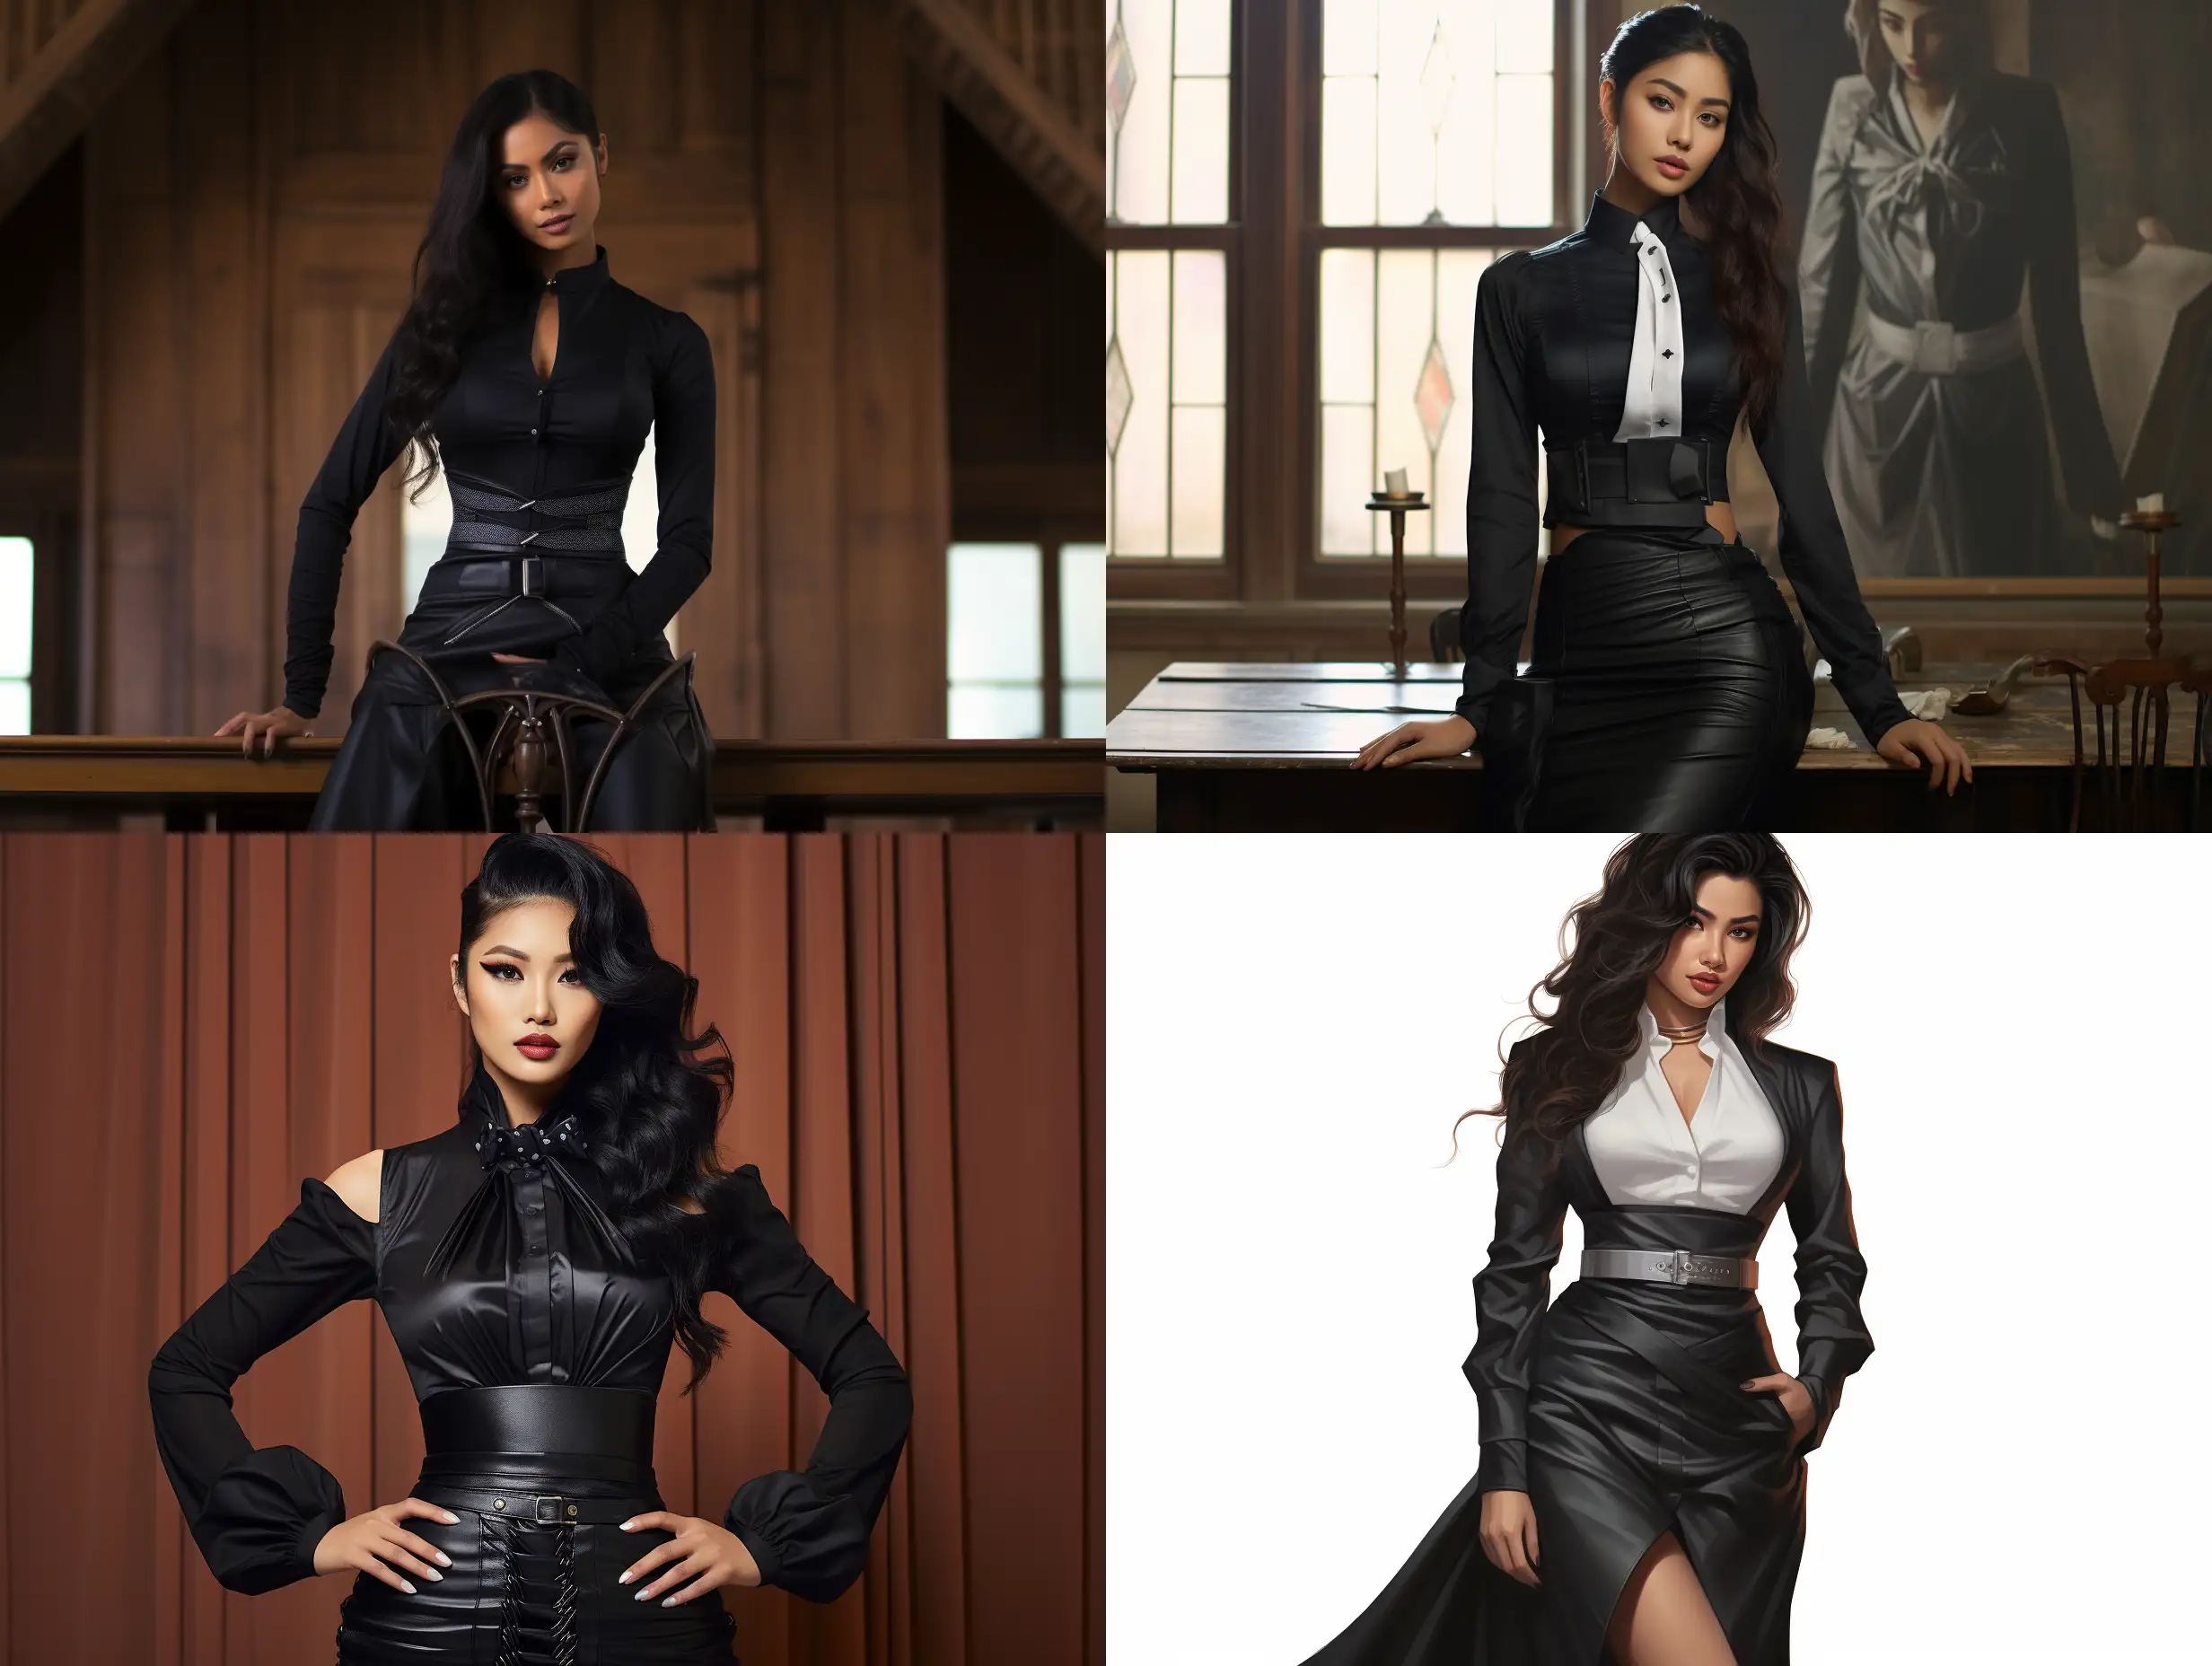 Elegant-Asian-Woman-in-Stylish-Tuxedo-Ensemble-and-Leather-Boots